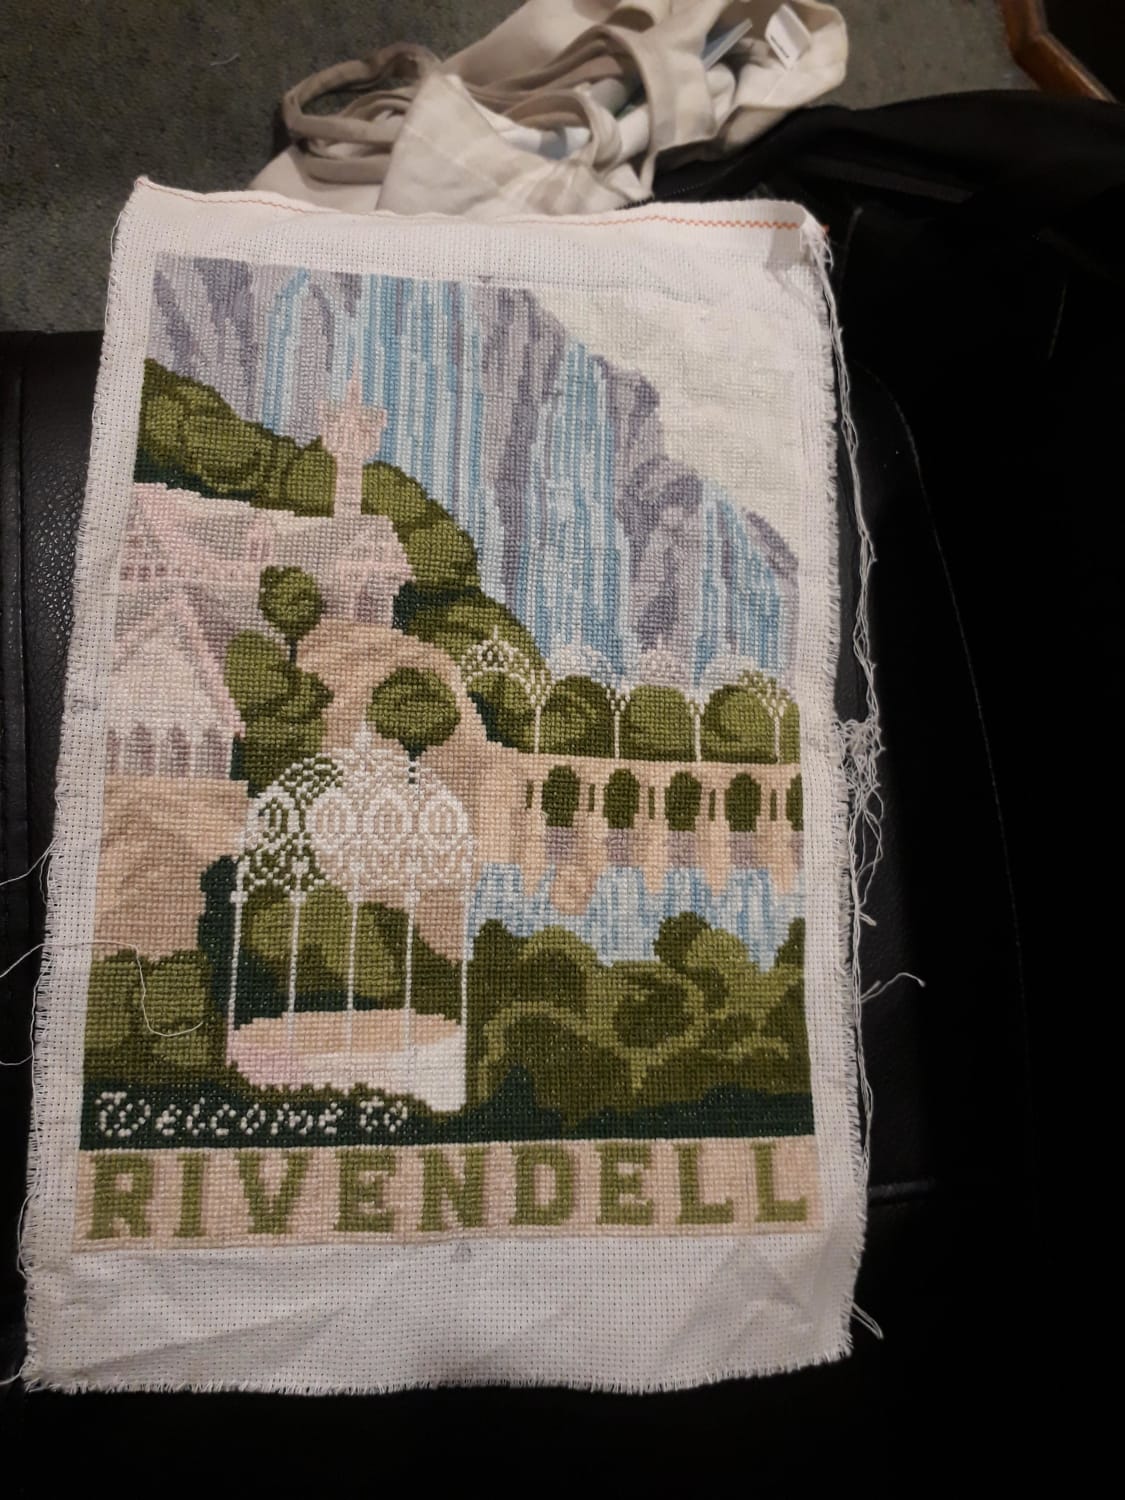 [FO] Finished Rivendell a few days ago, after about 8 Months. Pattern by CountryMagicStitch on Etsy.